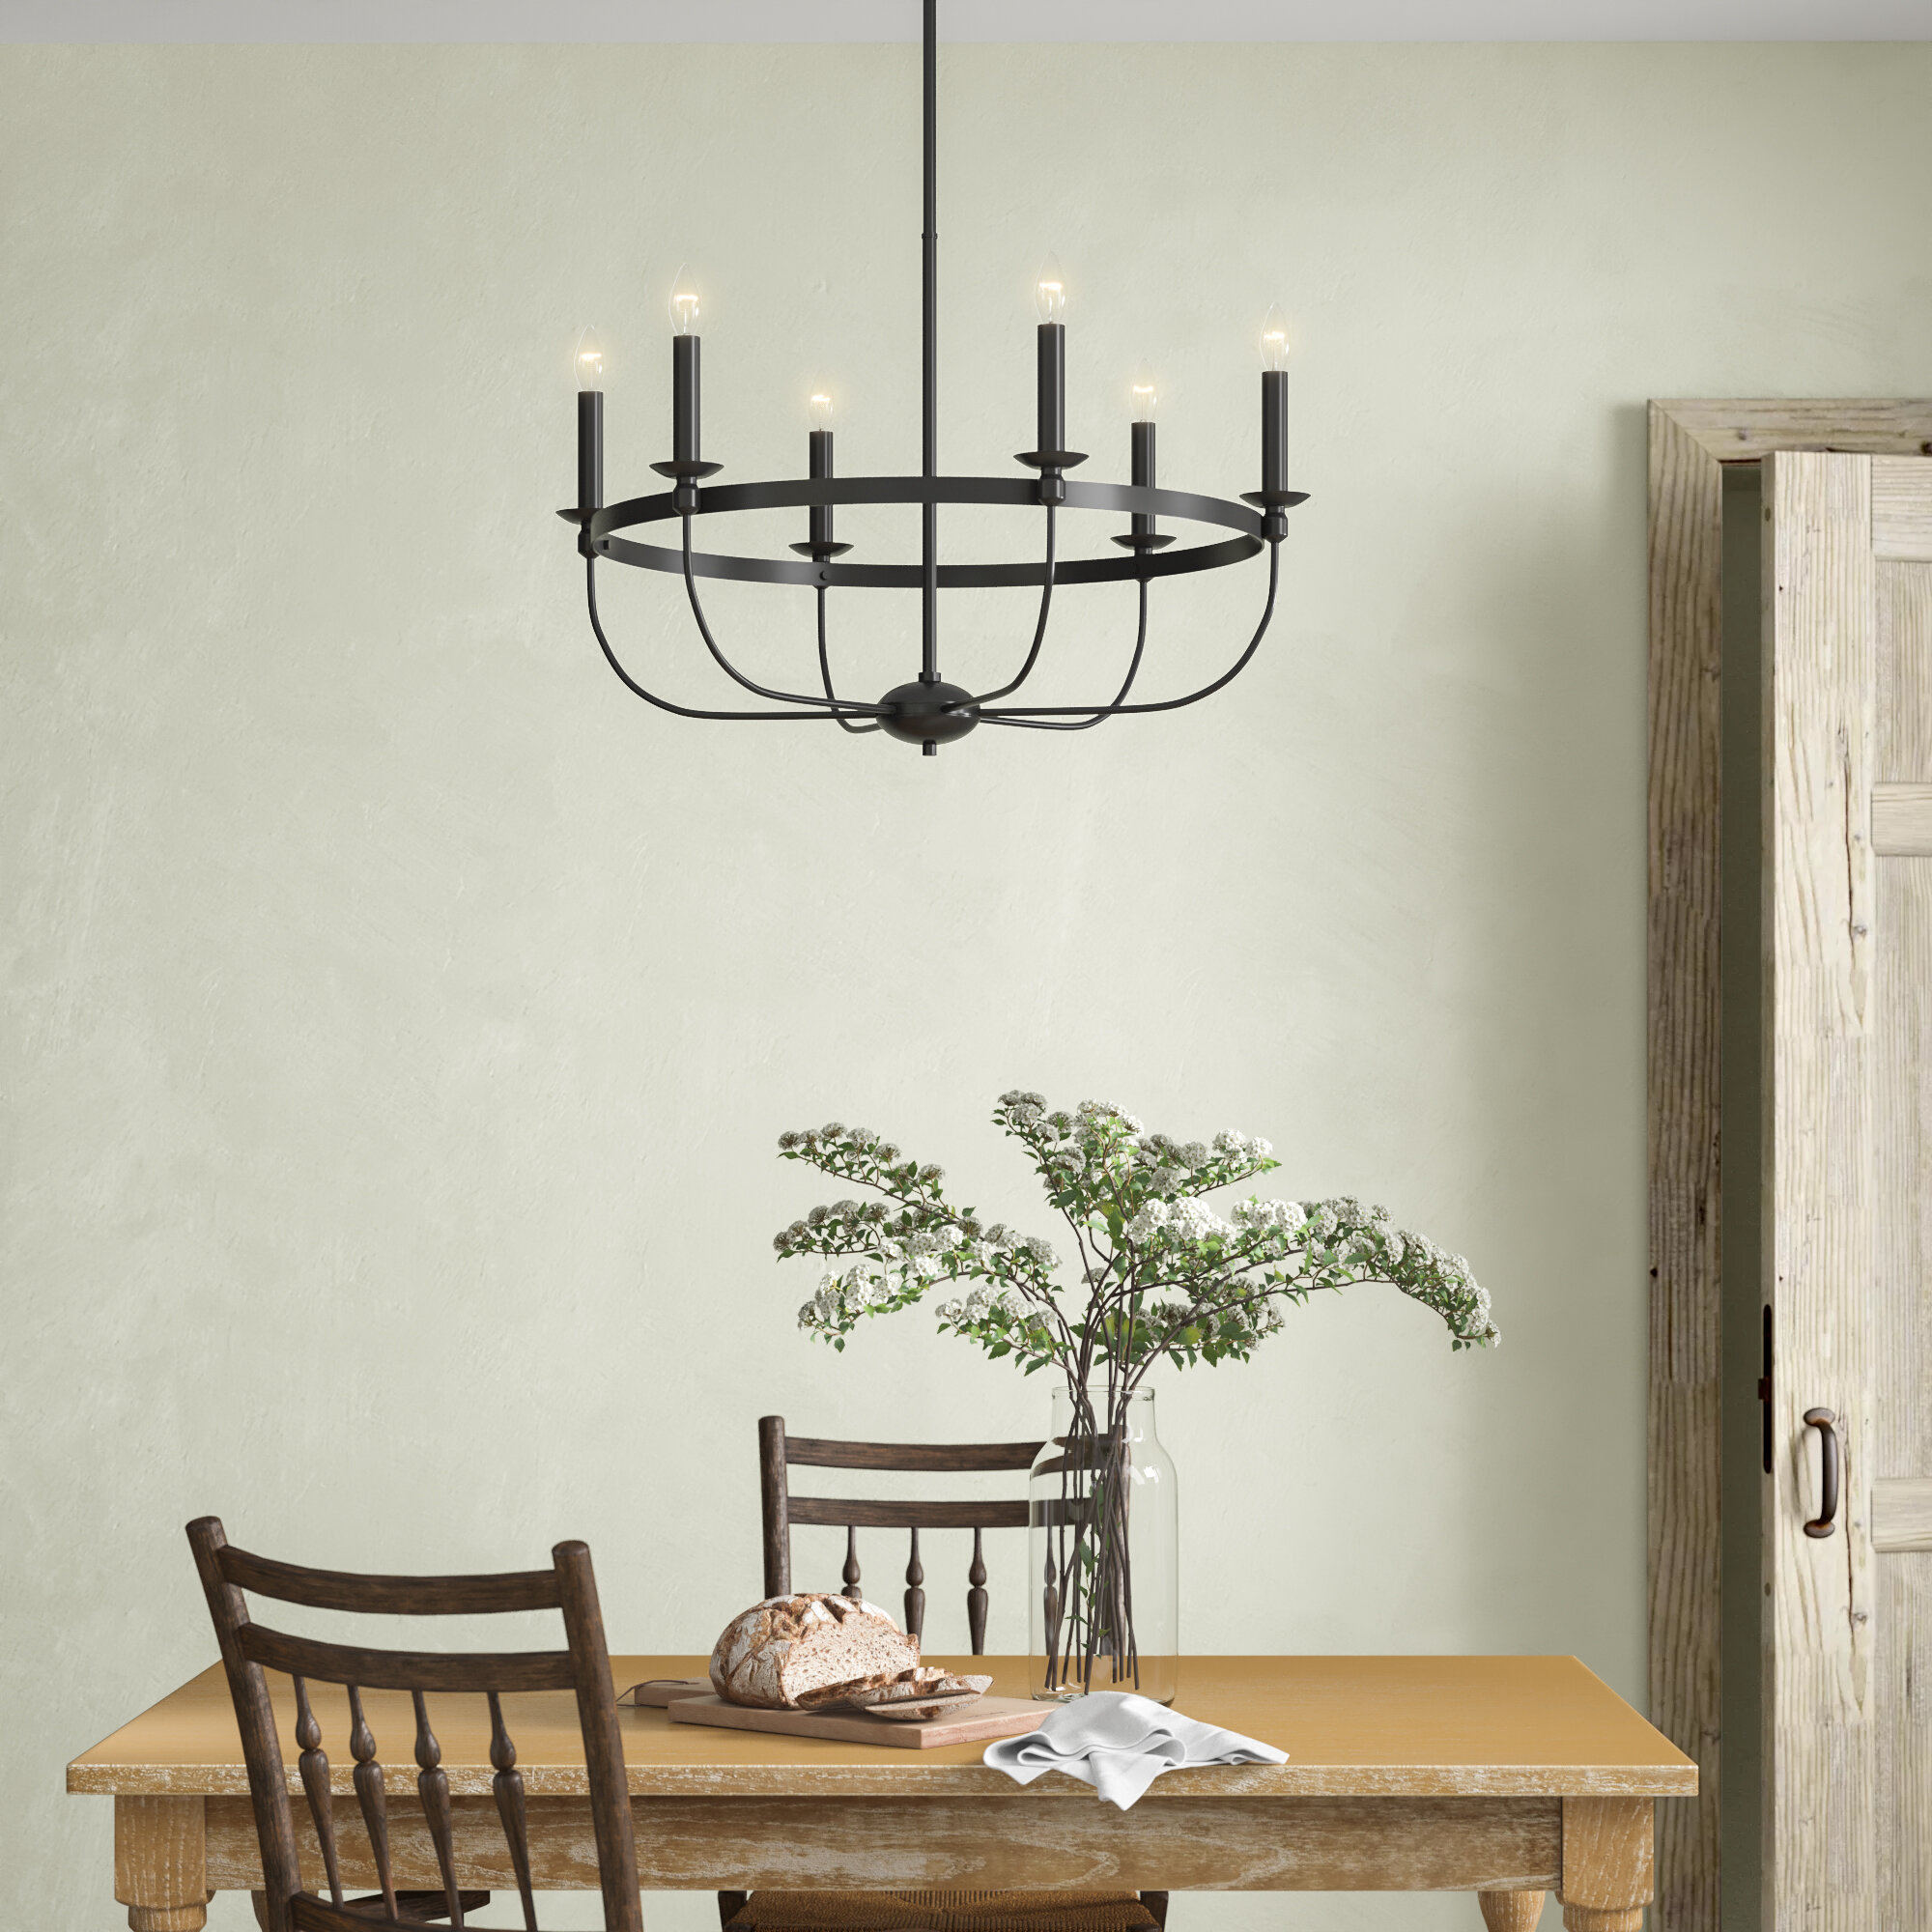 Oxendine 6 - Light Candle Style Wagon Wheel Chandelier